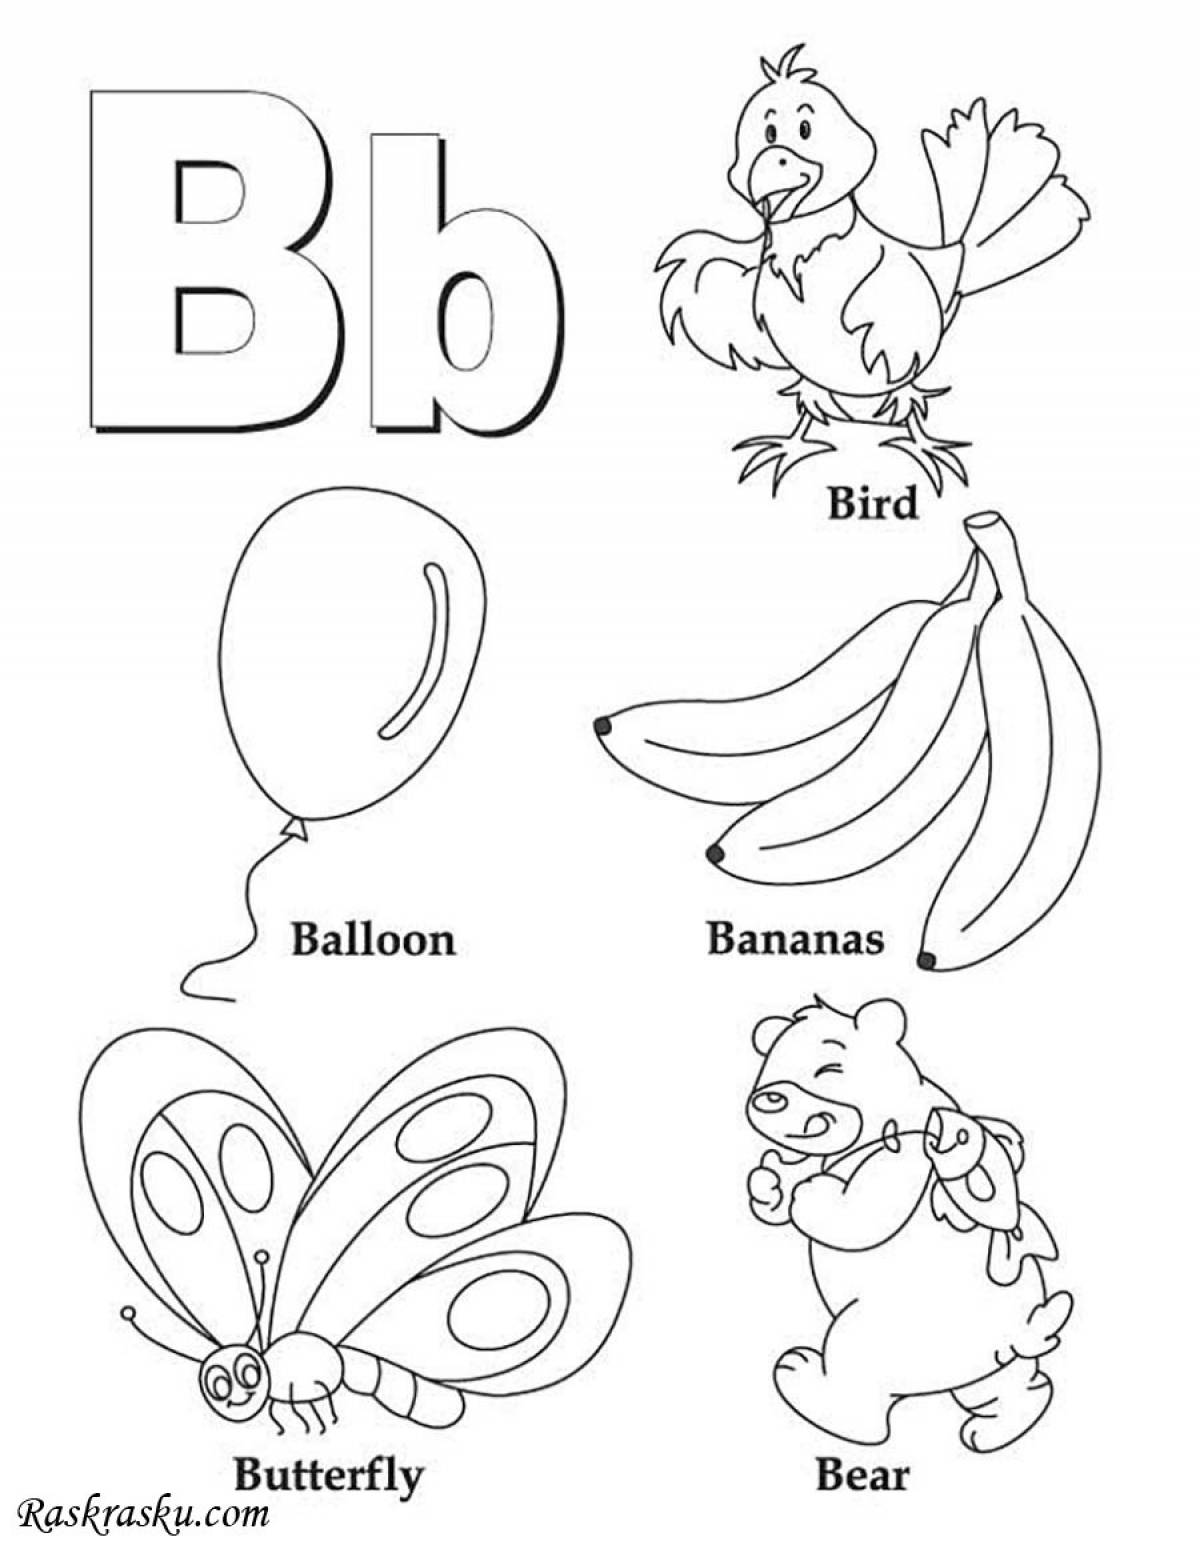 Exquisite coloring book with english letters